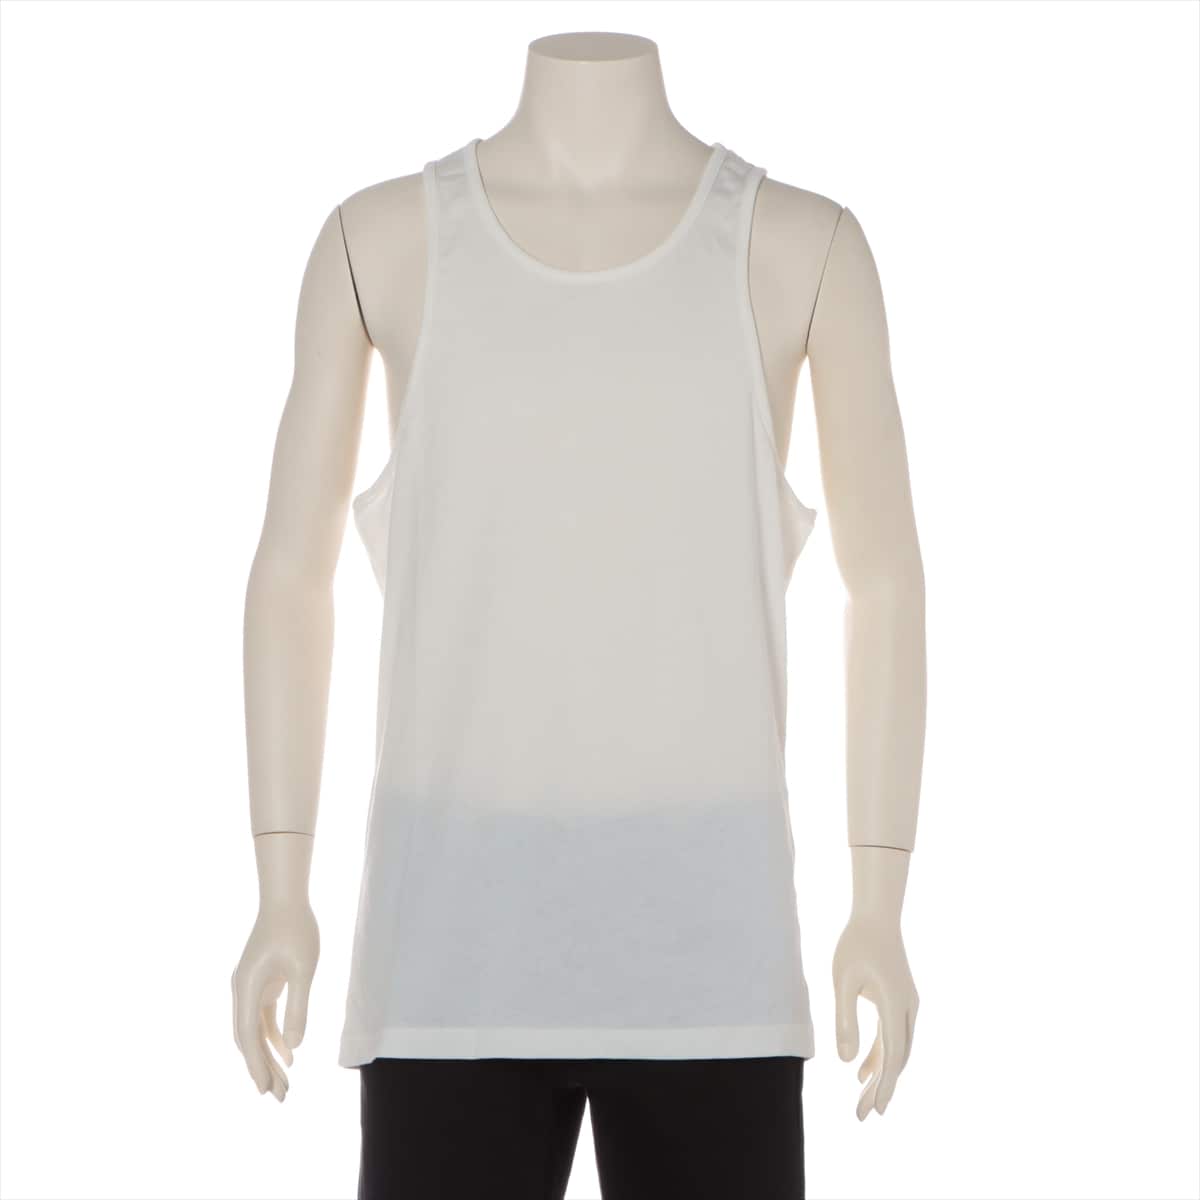 FEAR OF GOD Essentials Cotton & polyester Tank top S Men's White No brand tag